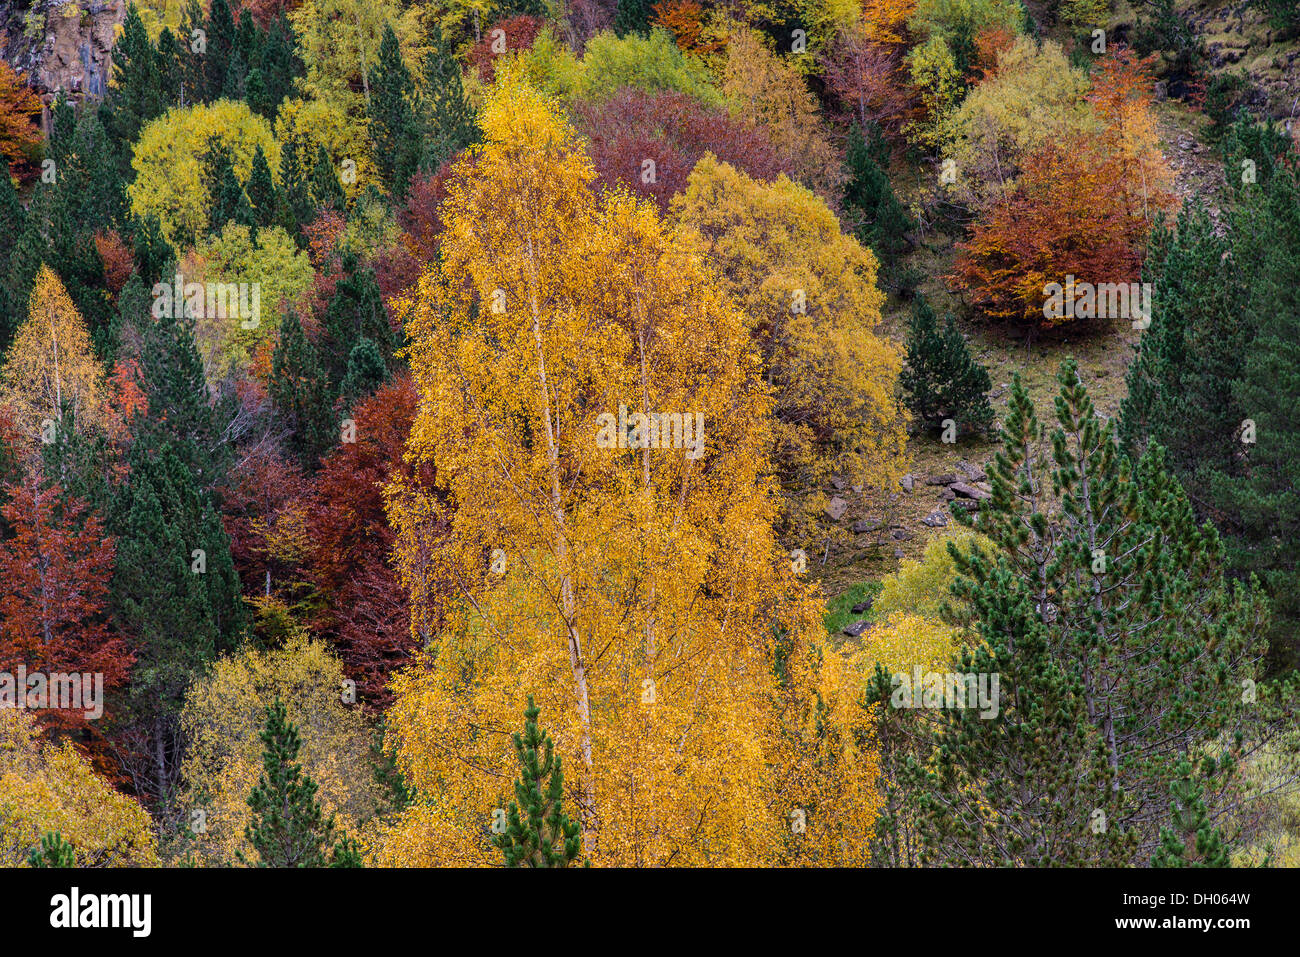 Scenic landscape with colorful fall foliage made of yellow, green and brown leaves Stock Photo